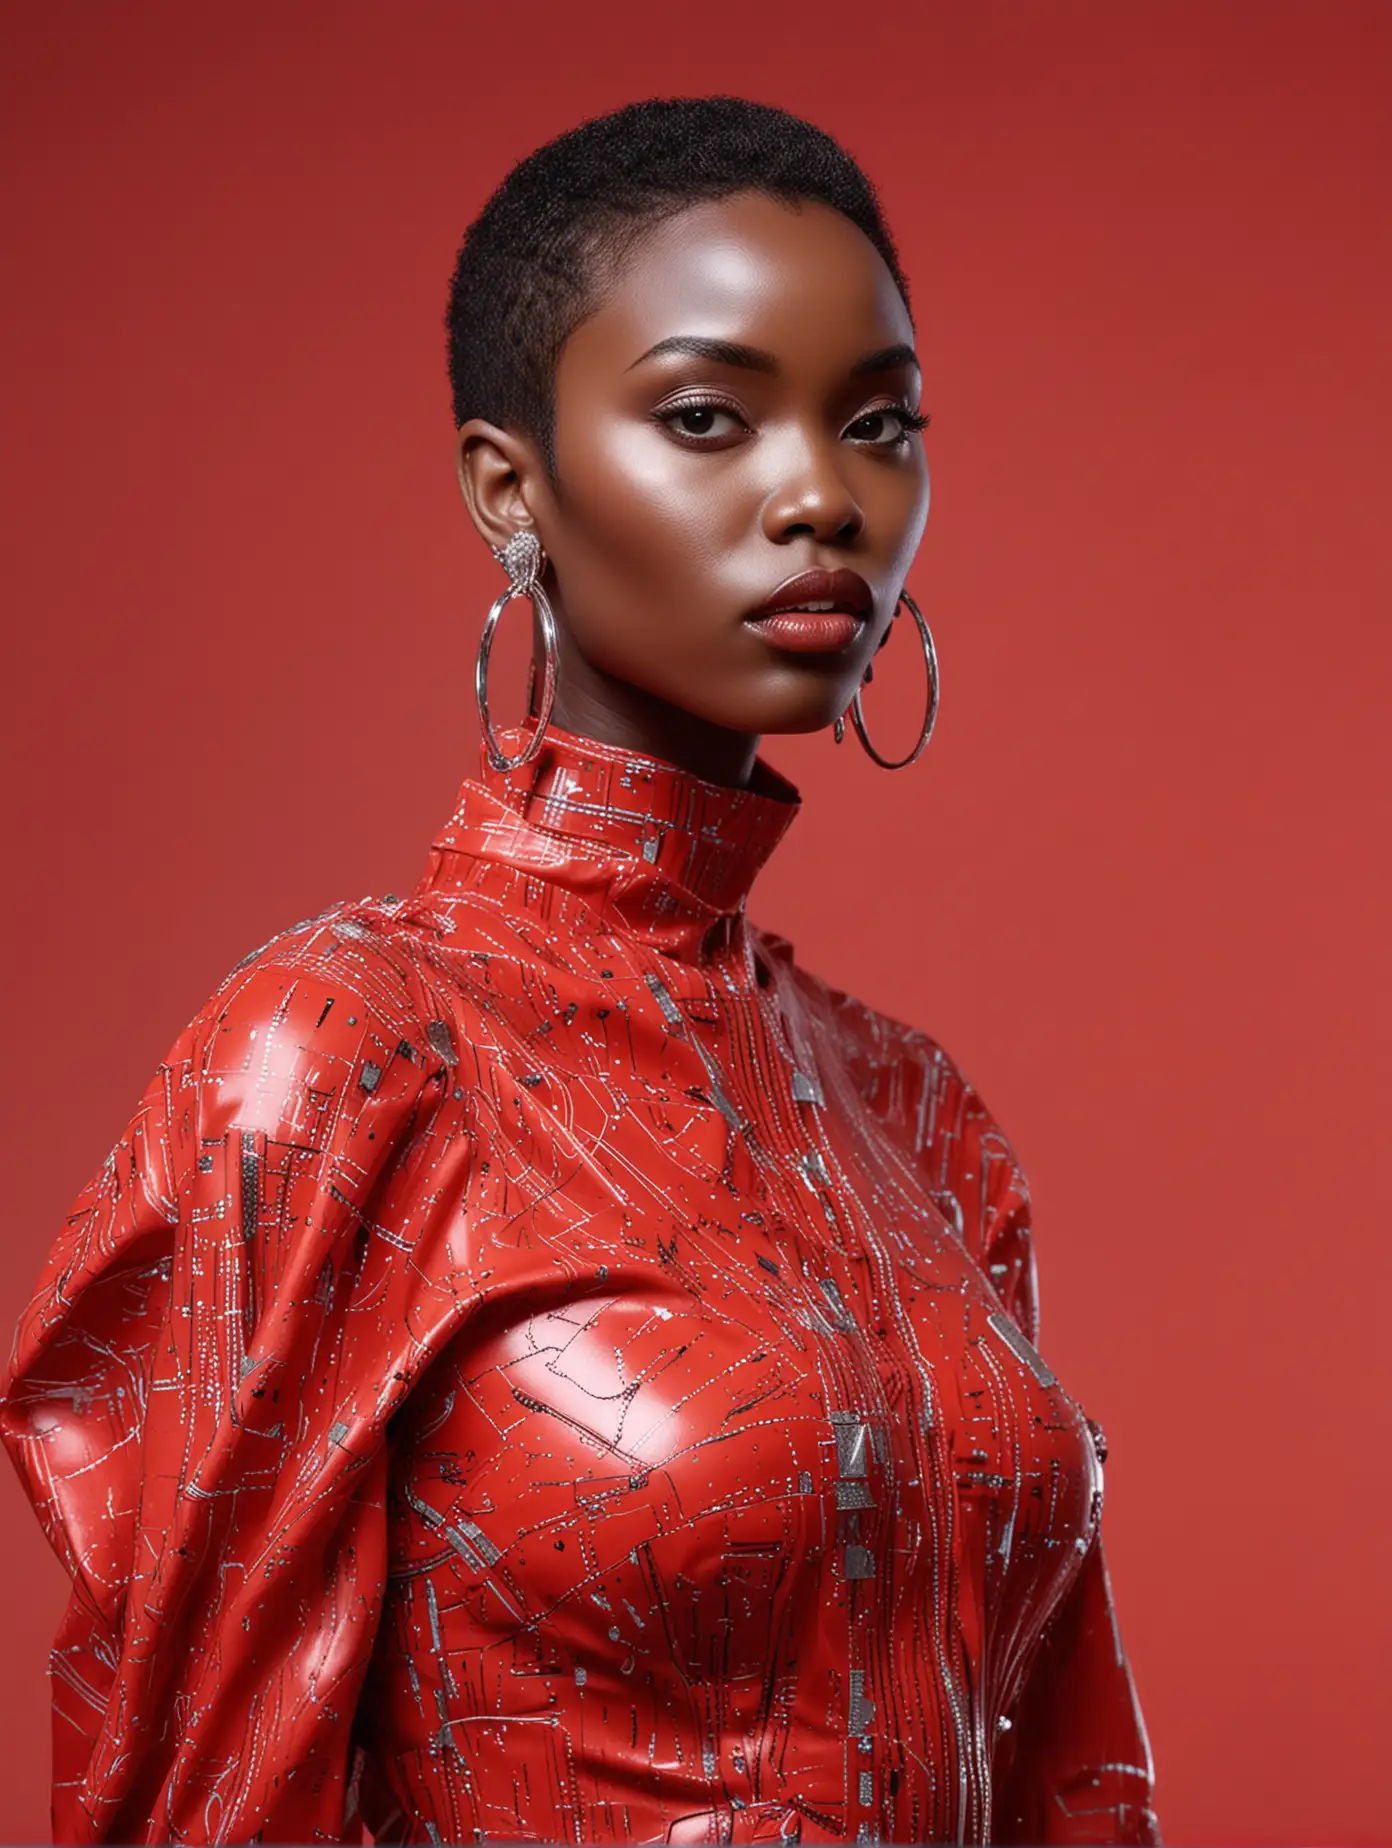 Futuristic African Model Poses in Red Art Space with Bold Fashion Ensemble